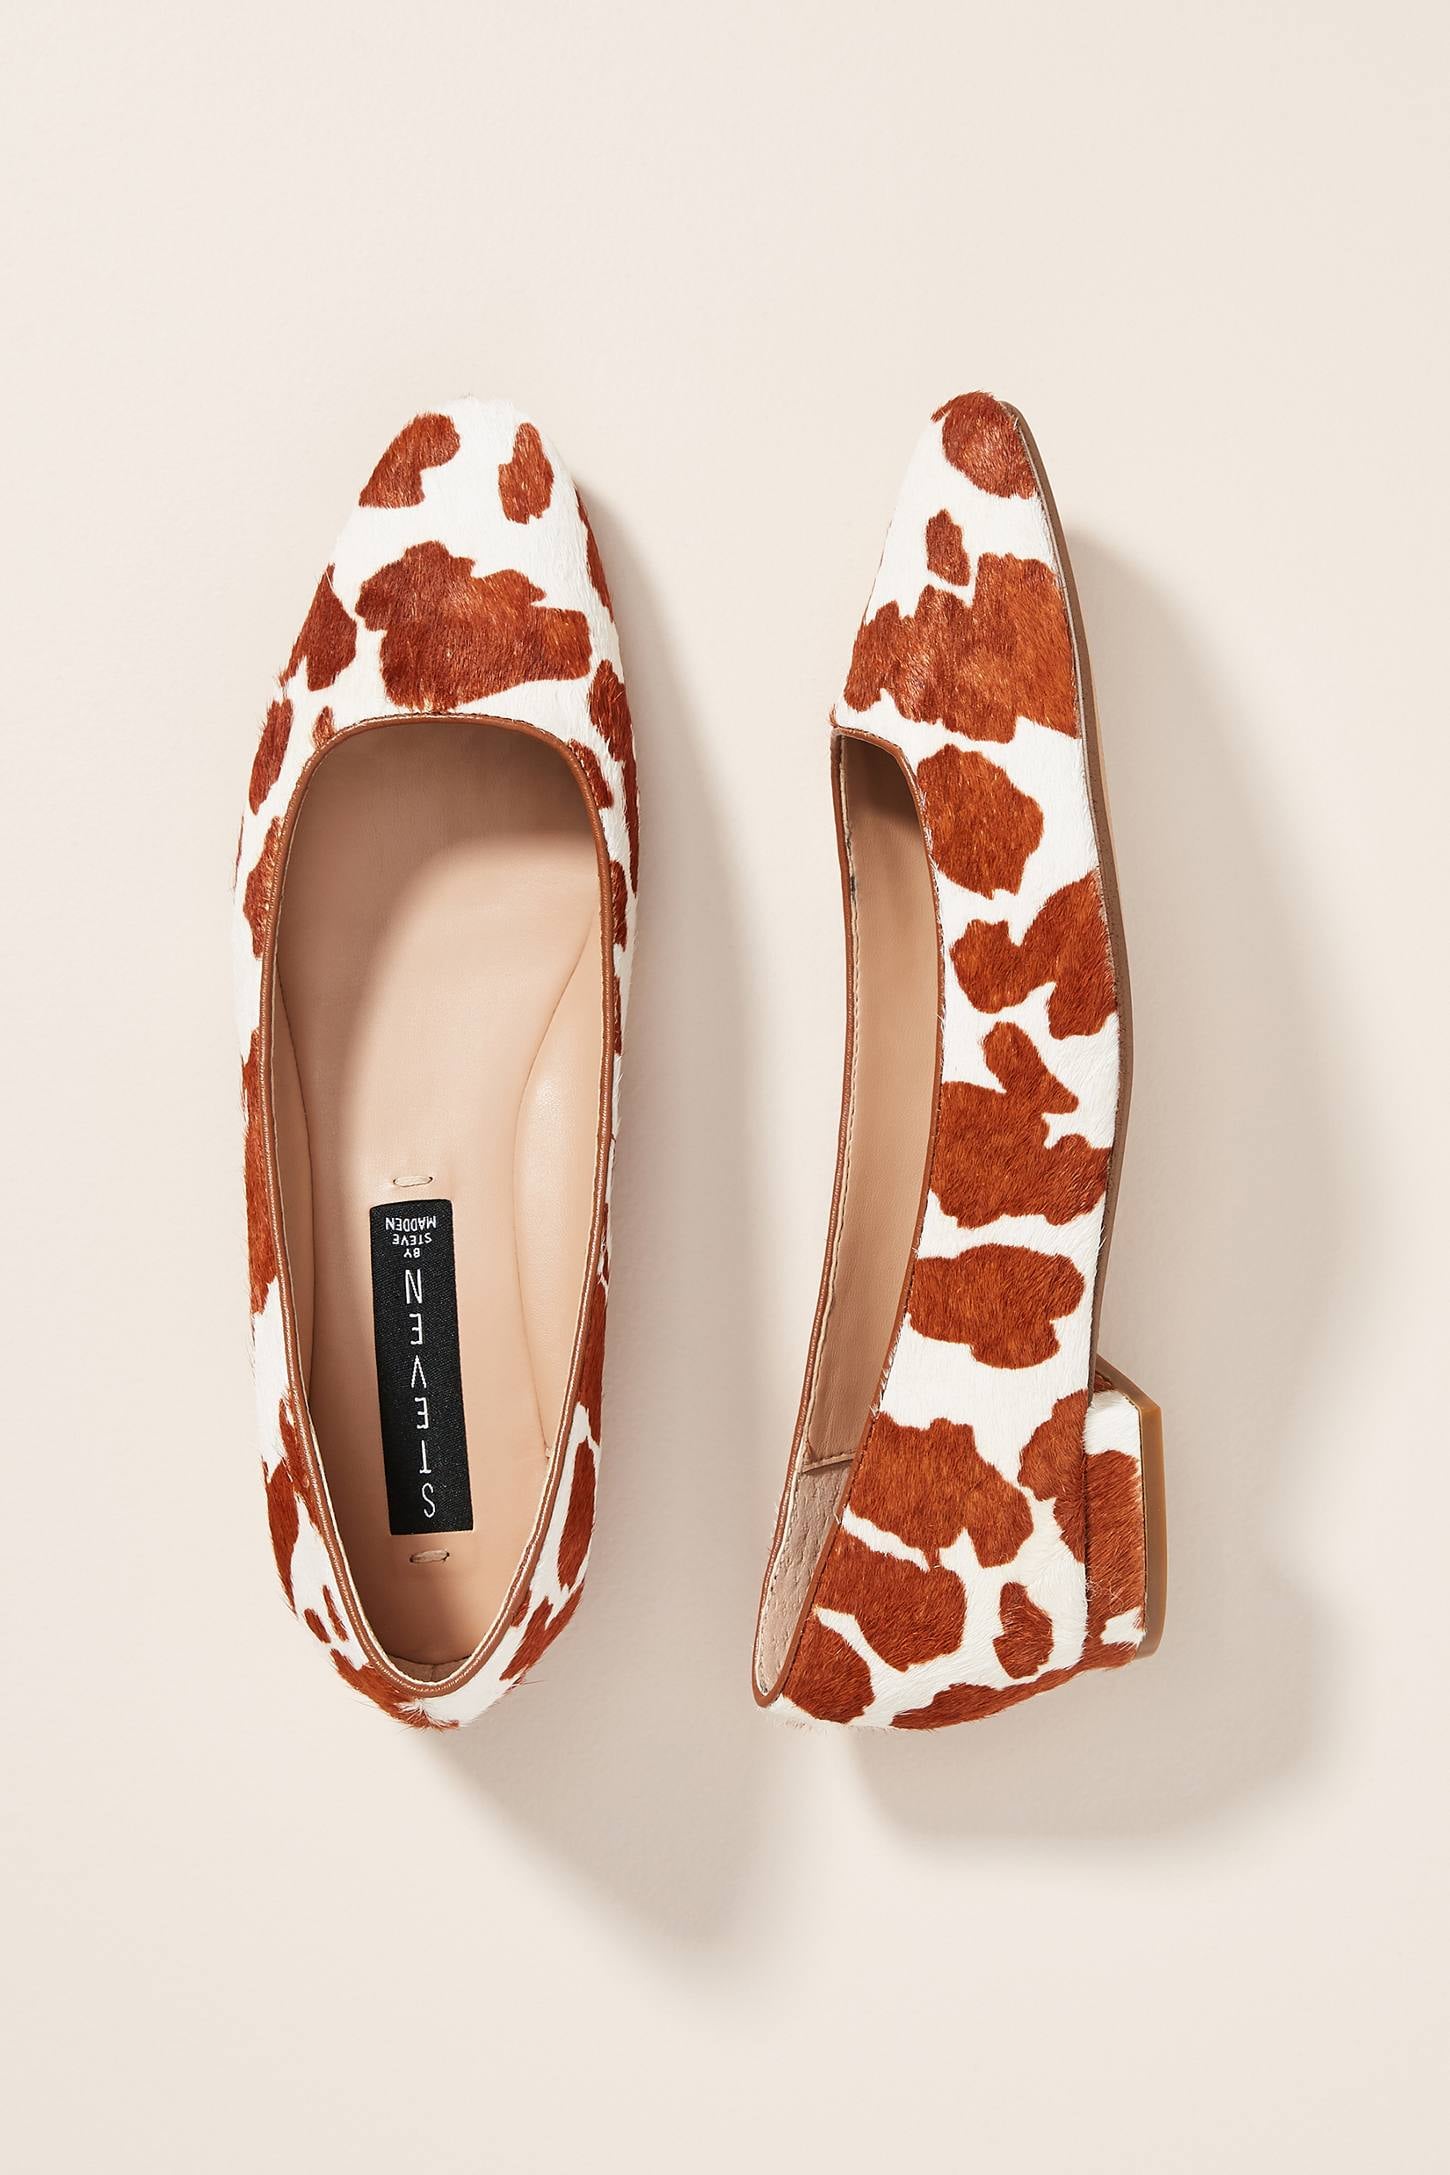 anthropologie women's shoes